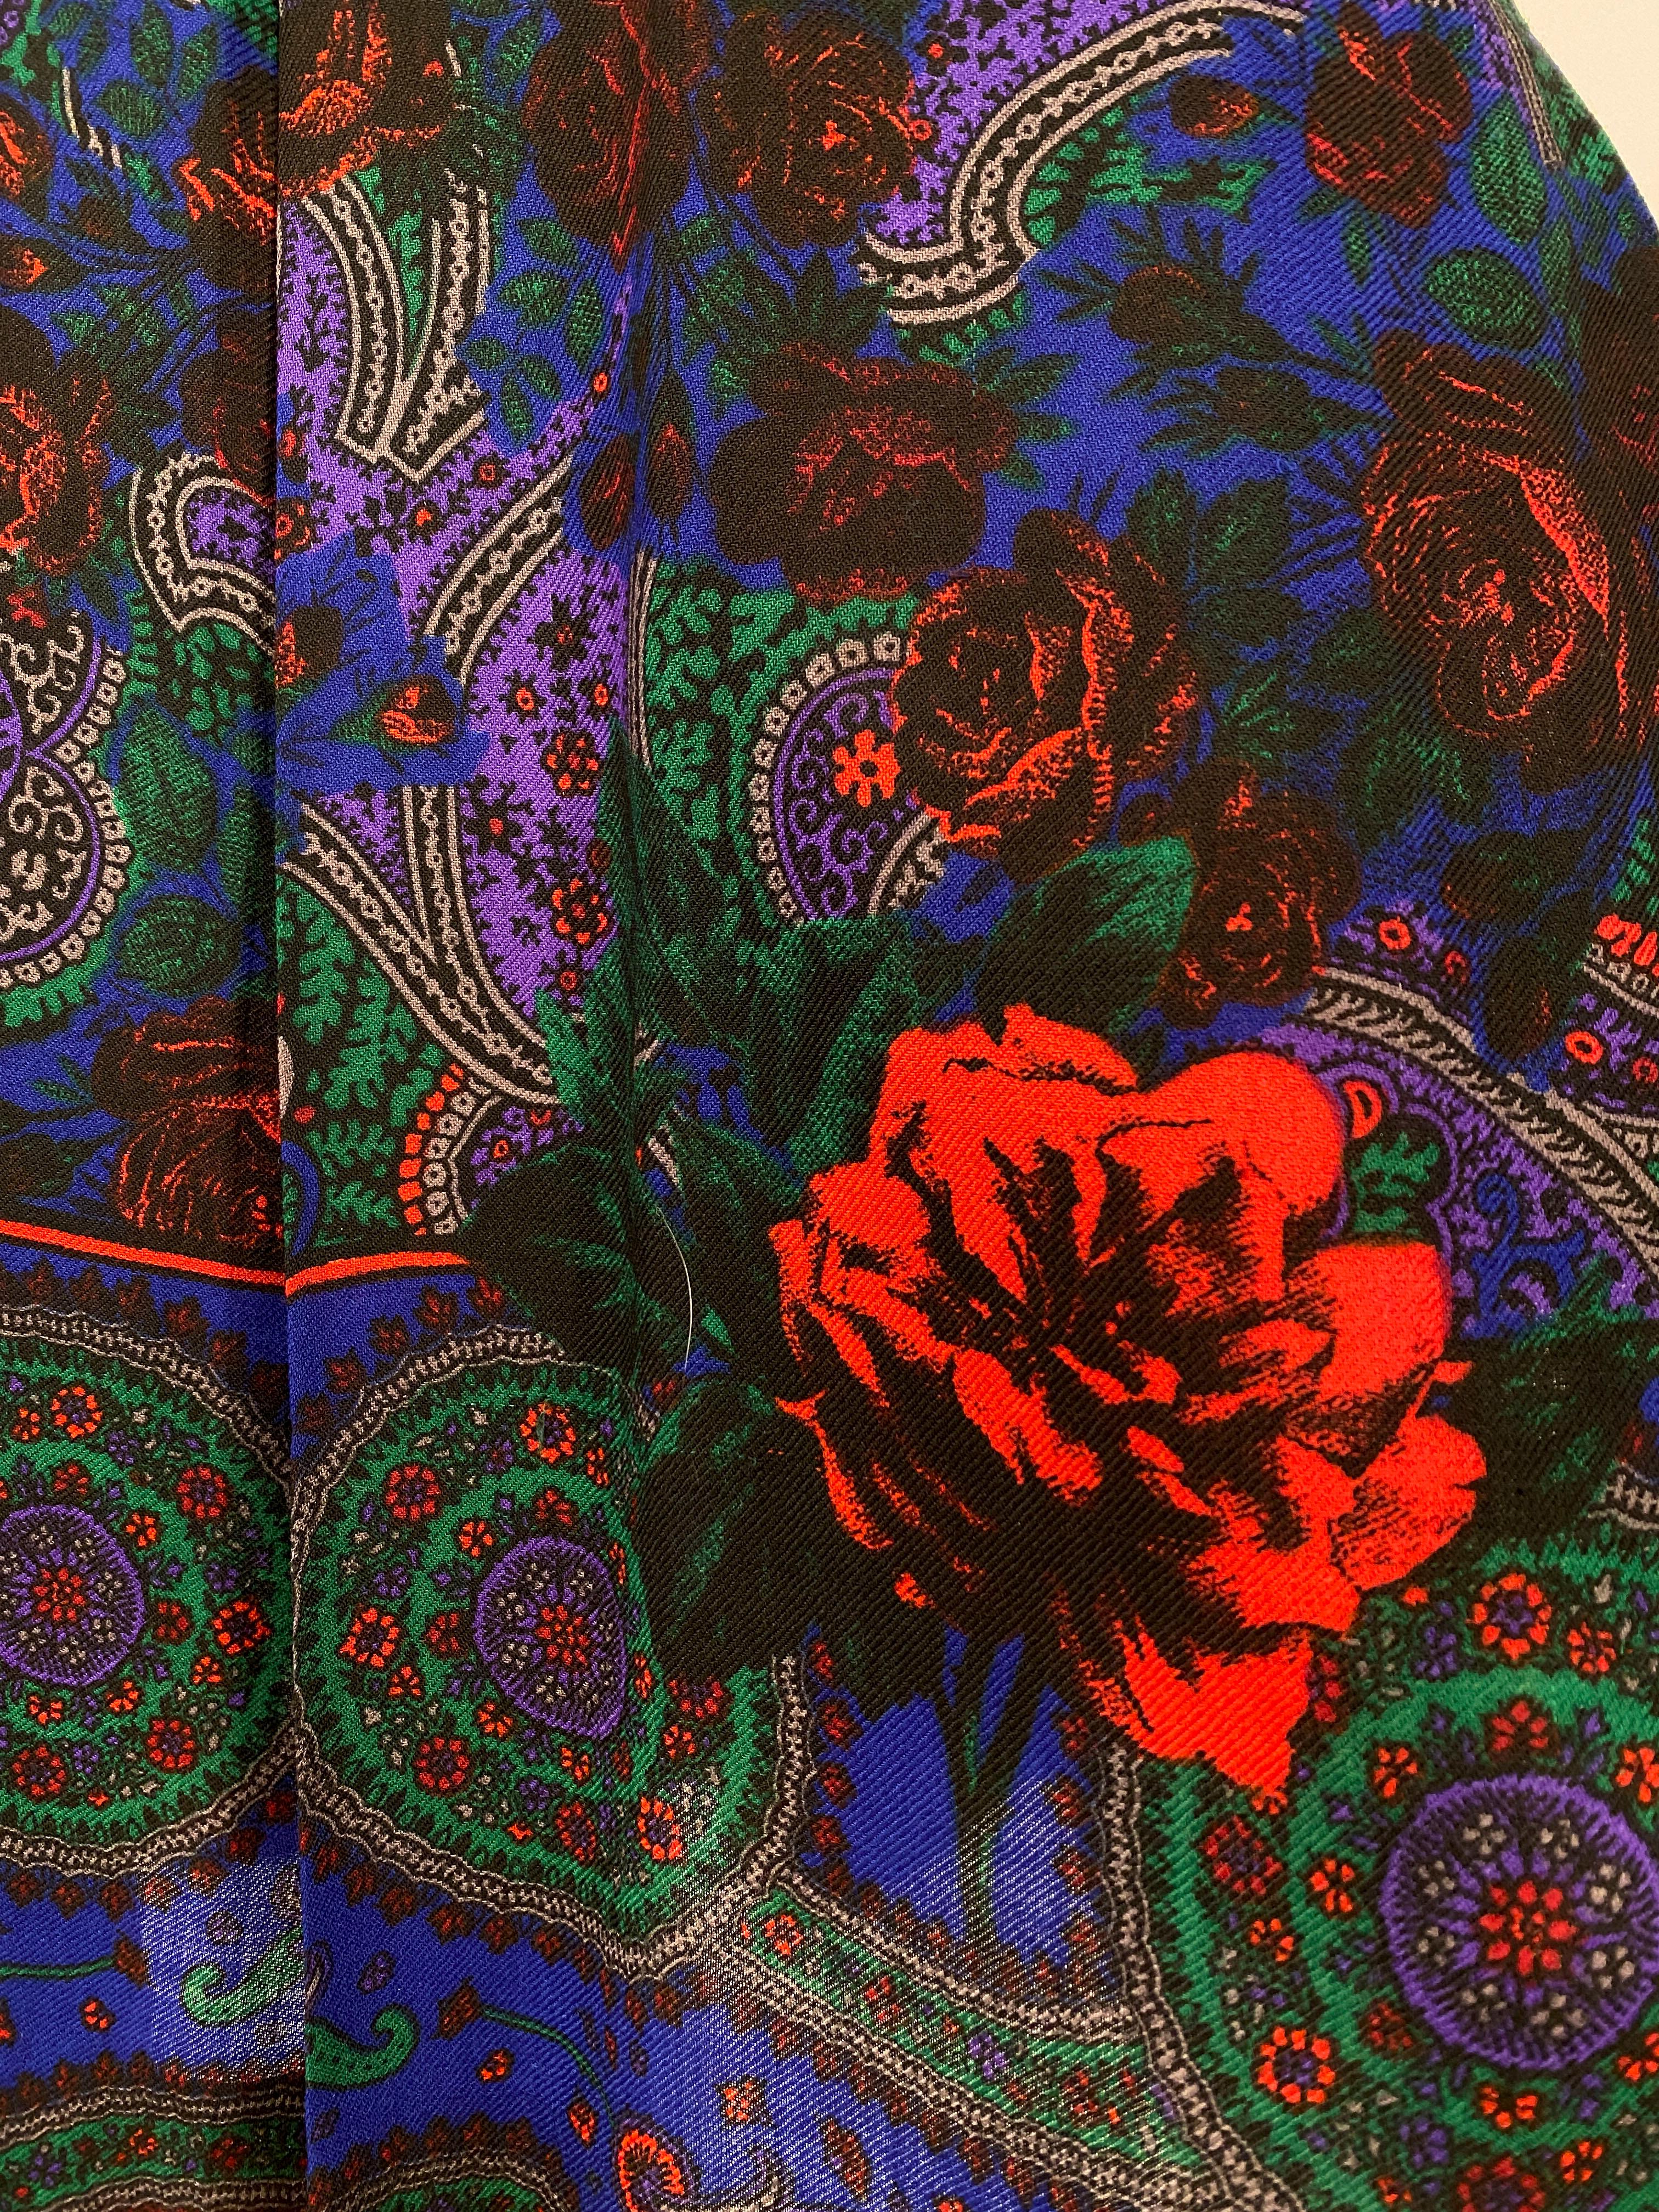 1970s fine wool skirt featuring a vibrant colored rose print on a deep royal blue background. There are 4 deep pleats starting at the hip along the sides. The side zipper closure is invisible while worn.